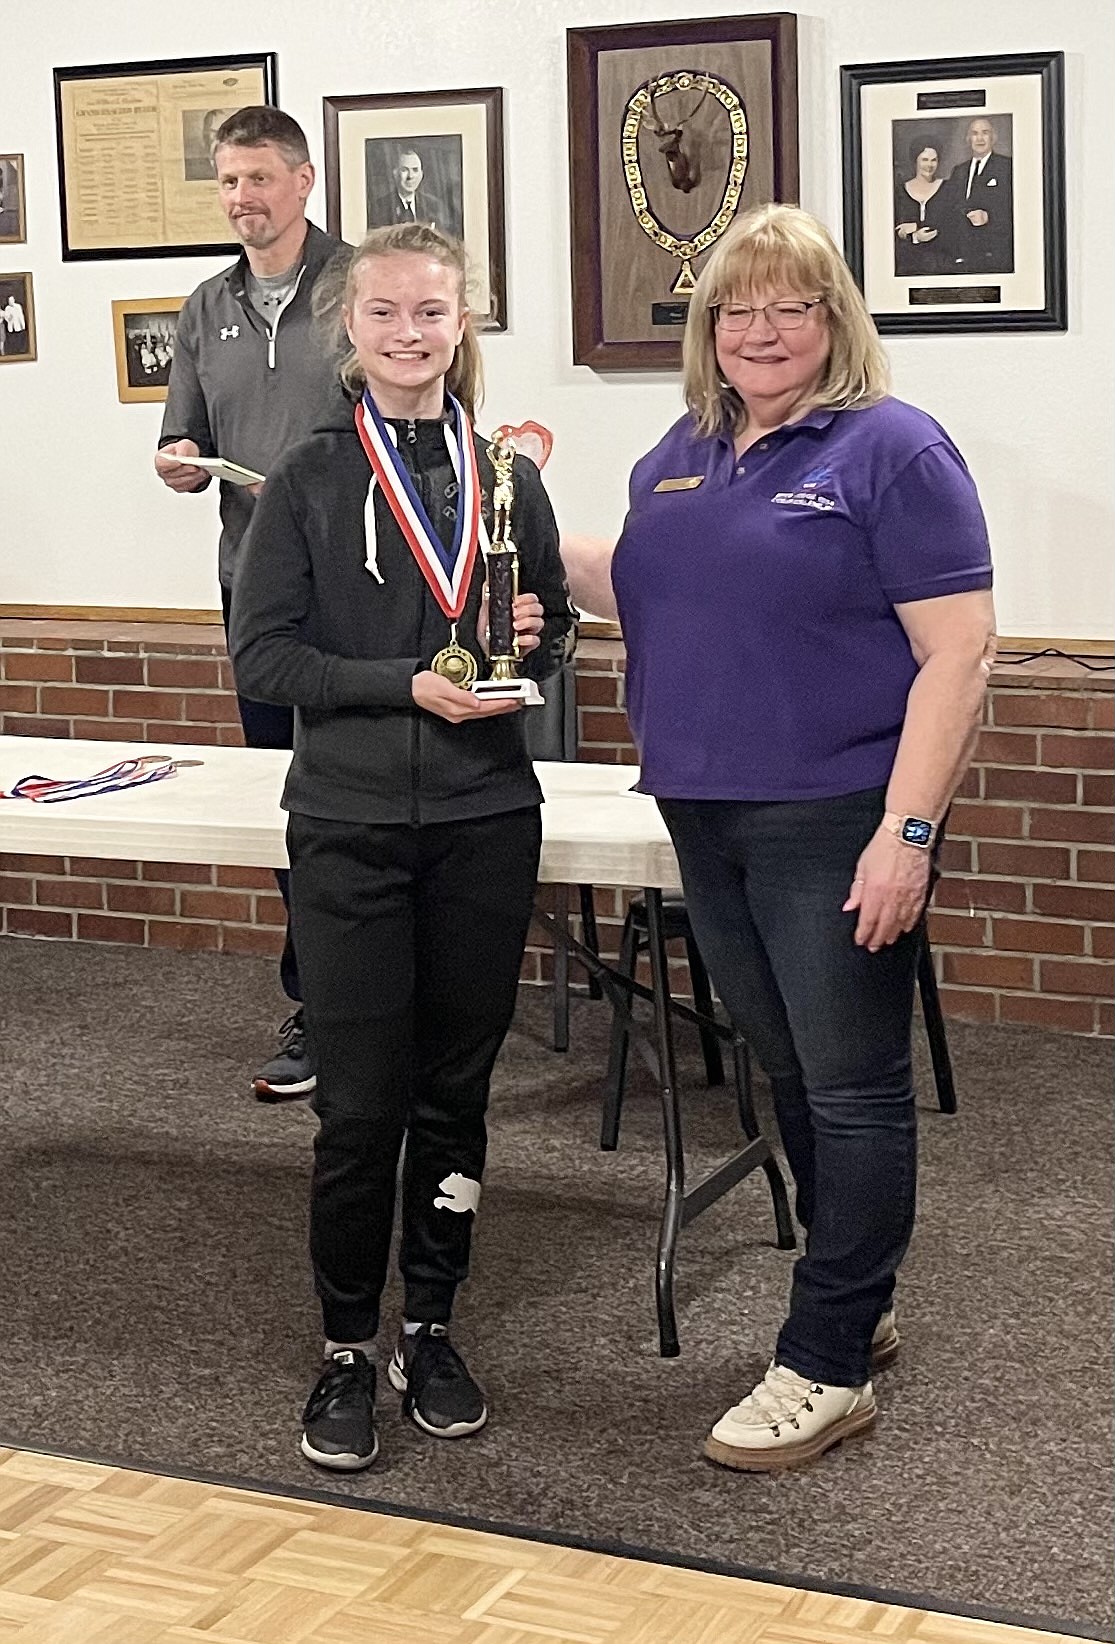 Courtesy photo
Malia Miller won the Waide Hamner (Top Gun) Award as the top overall scorer for the girls at the Coeur d'Alene Elks Hoop Shoot held Feb. 20 at The Courts at Real Life in Post Falls. Also pictured is Debbi Nadrchal, Elks Exalted Ruler, and Todd Stoddard, Hoop Shoot director.